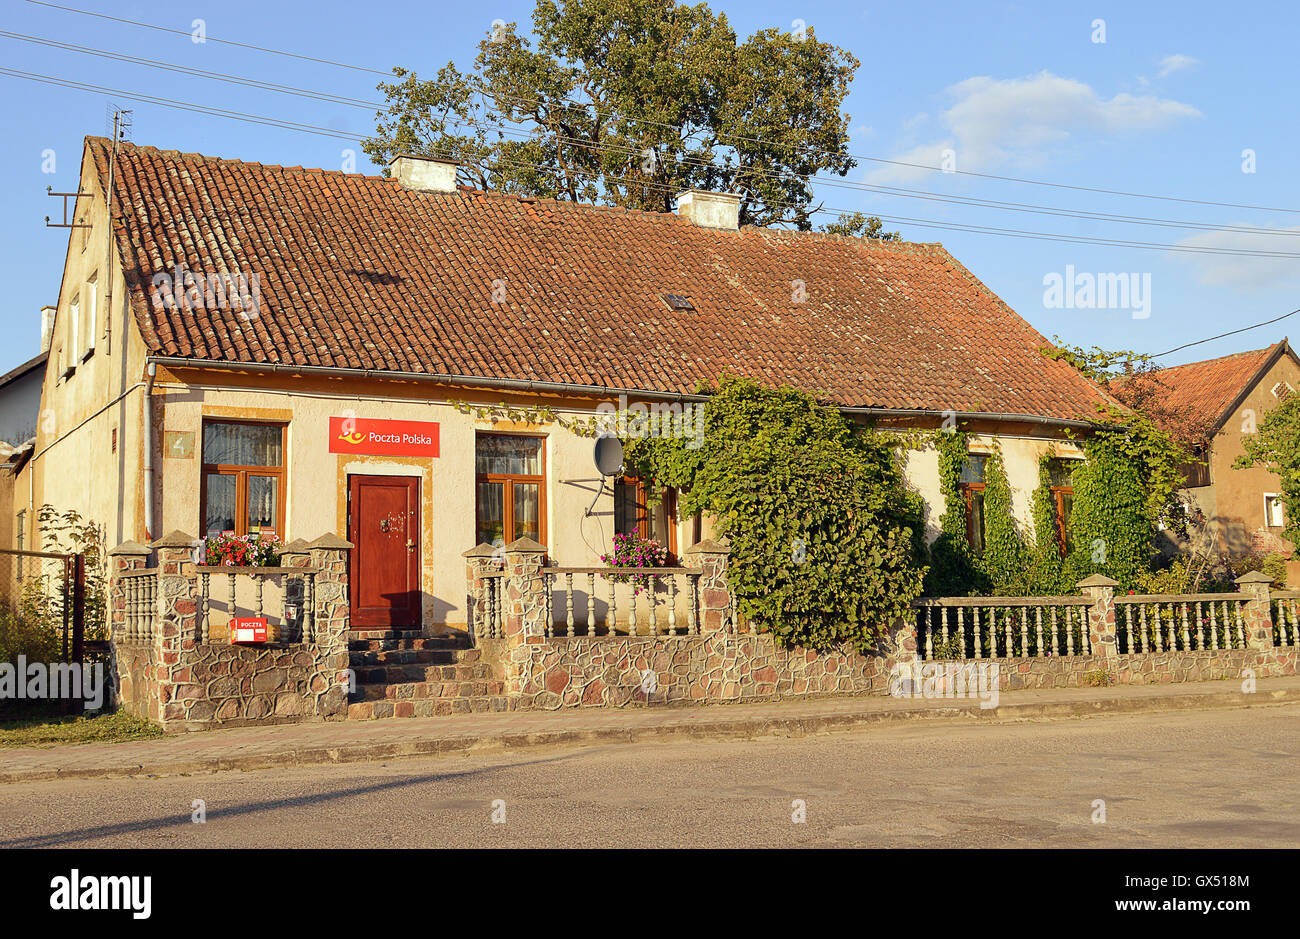 The post office in Zytkiejmy, Poland, close to the border with Russia's Kalingrad Oblast and formerly the village of Szittkehmen Stock Photo